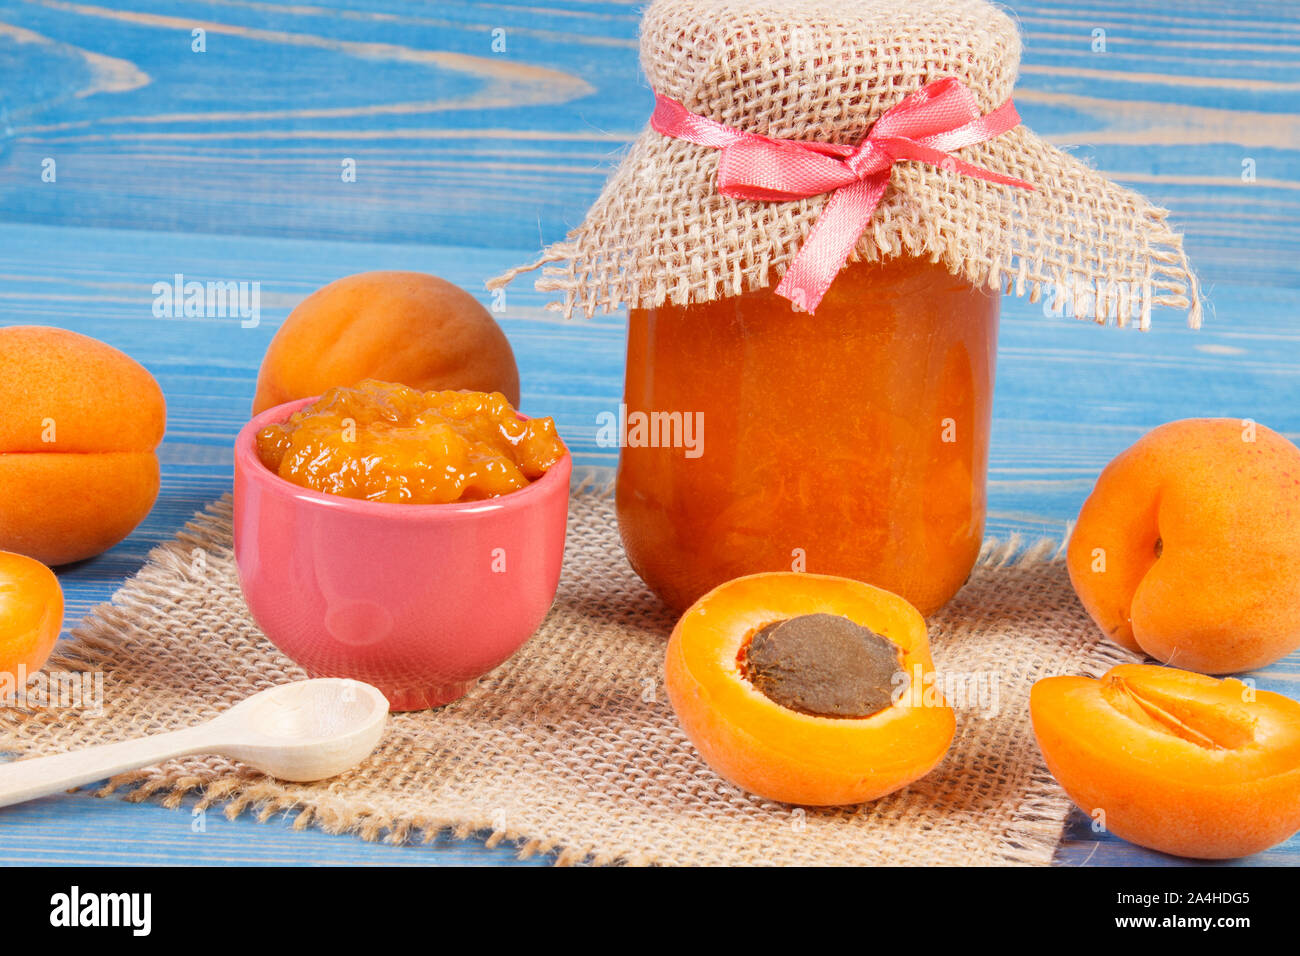 Apricot jam or marmalade in glass jar and ripe fruits on boards, concept of healthy sweet dessert Stock Photo